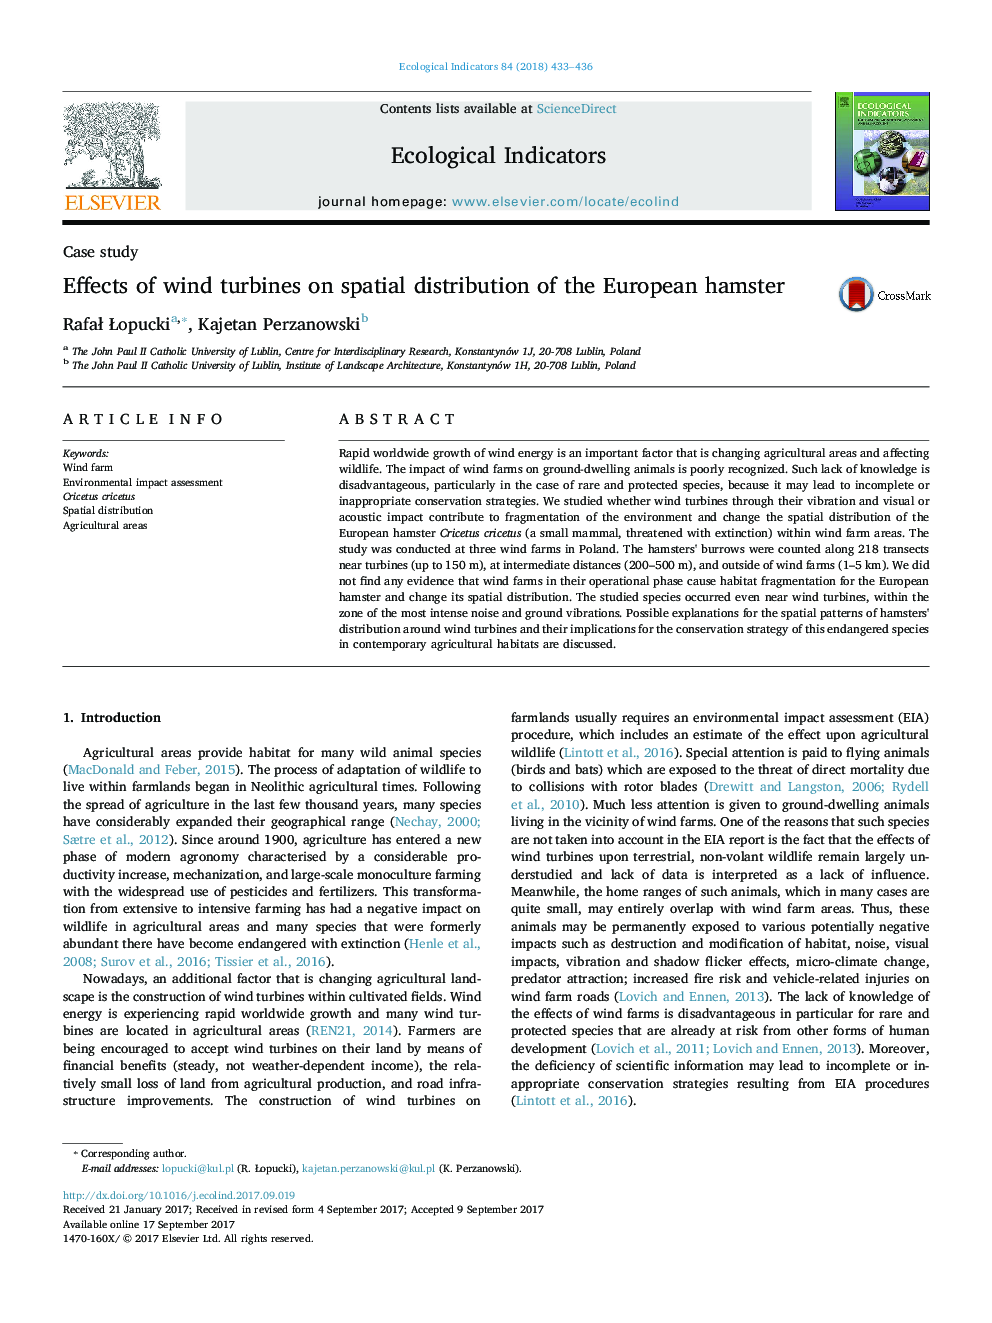 Case studyEffects of wind turbines on spatial distribution of the European hamster